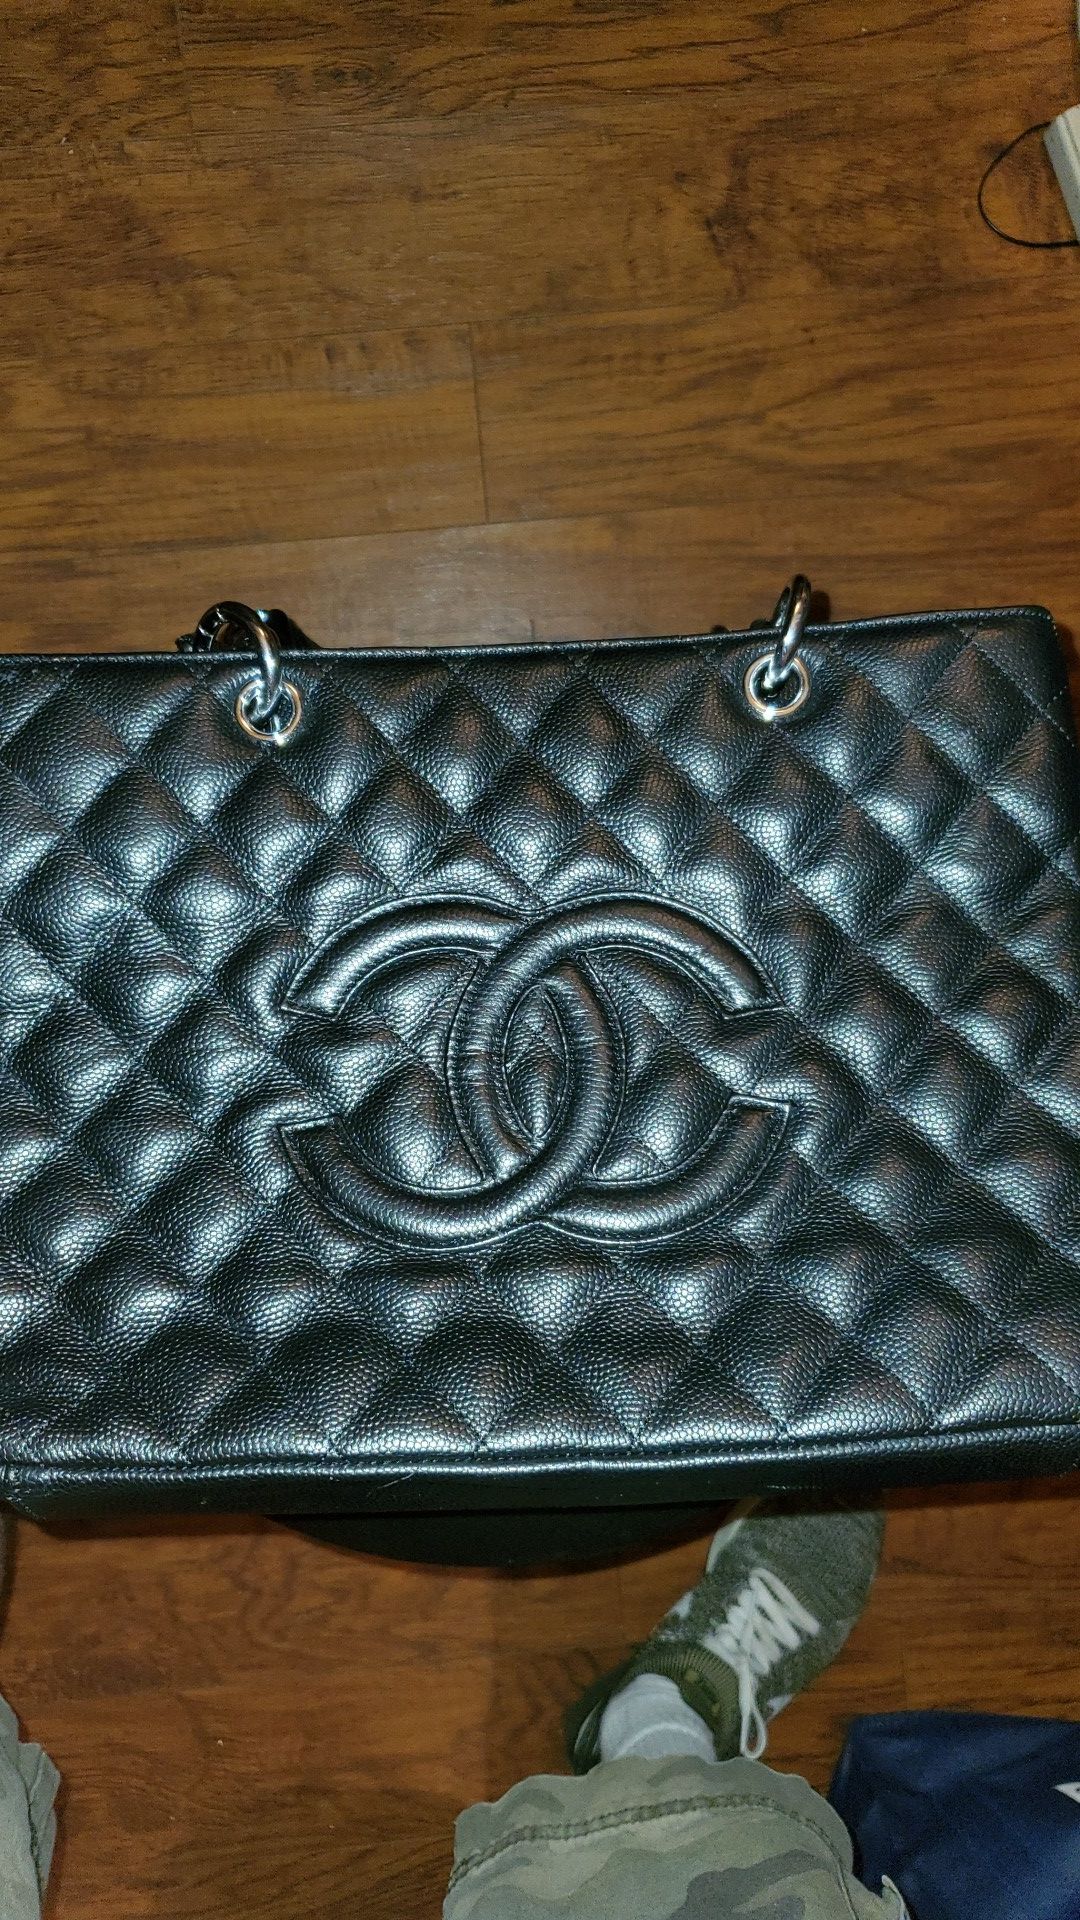 Real Chanel genuine leather tote bag.